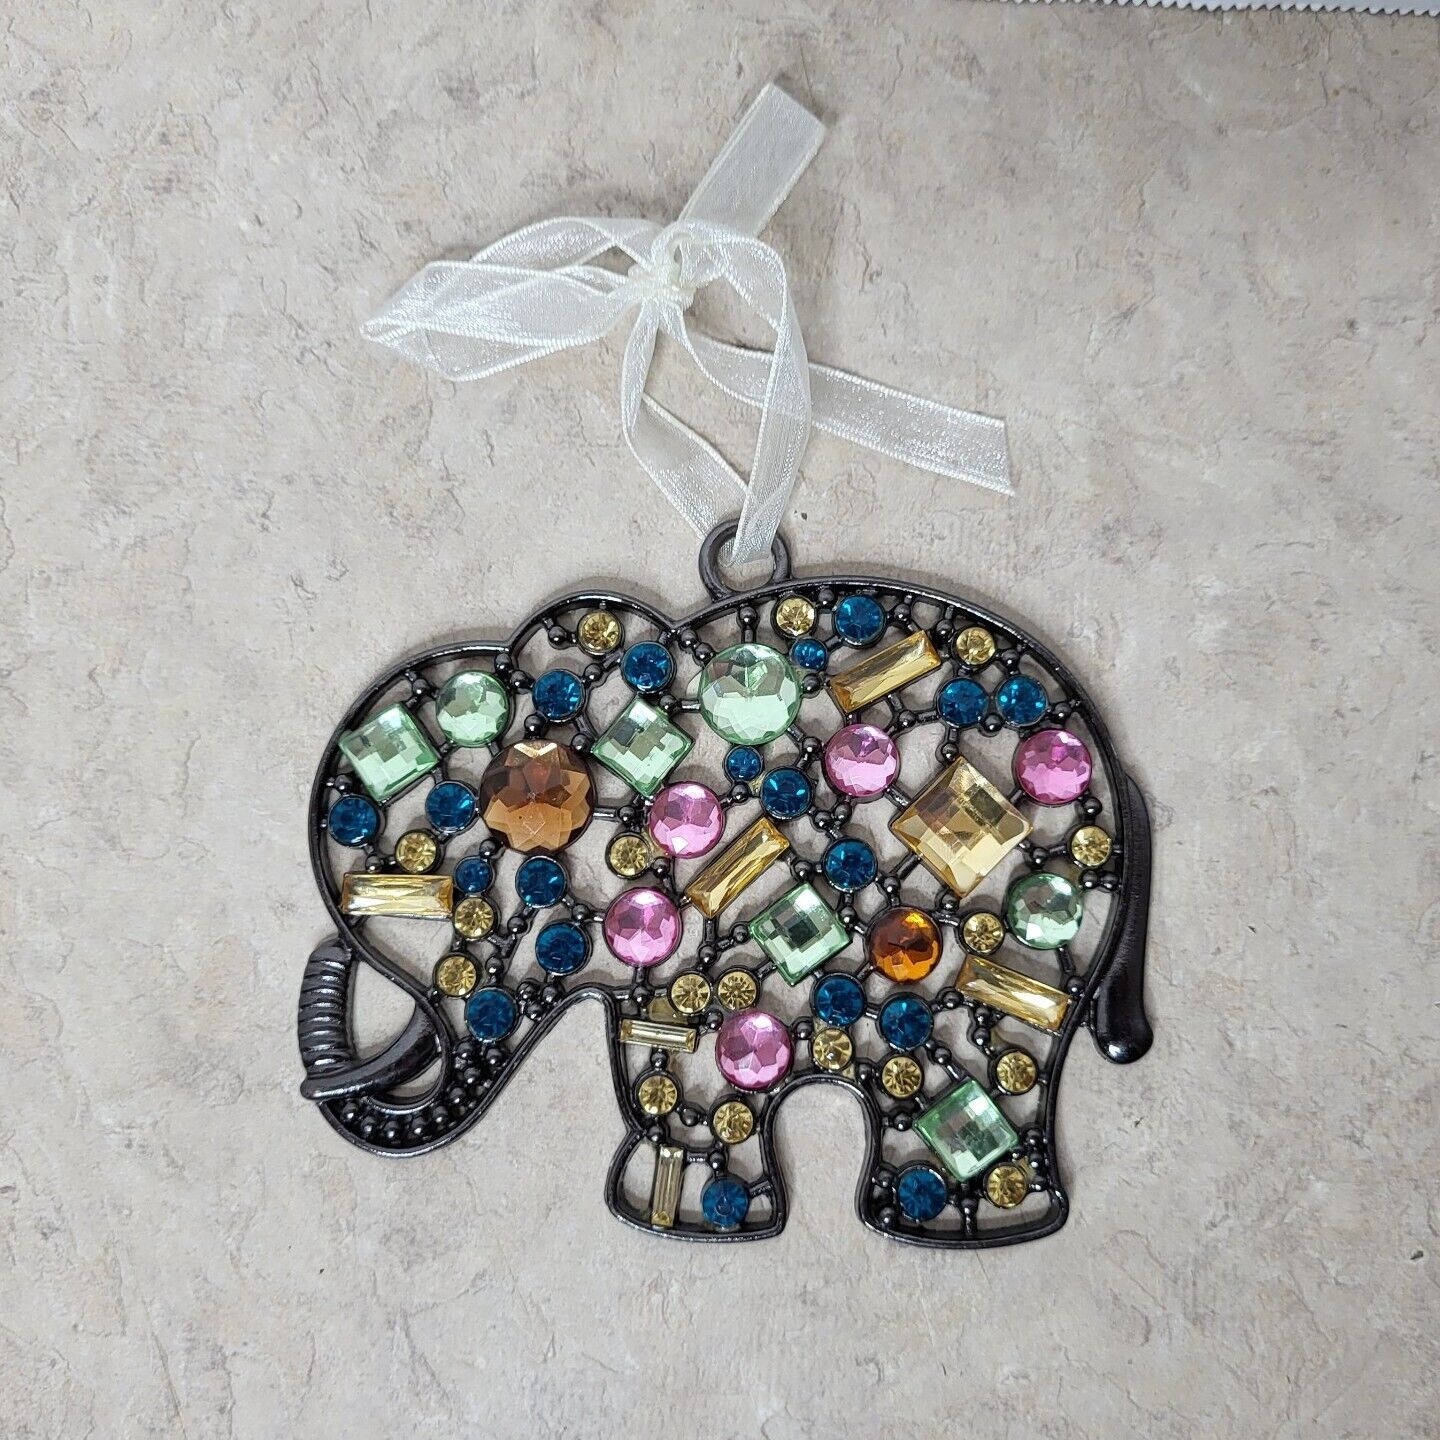 Kirkland’s Jeweled Metal Elephant Christmas Ornament with Ribbon For Hanging